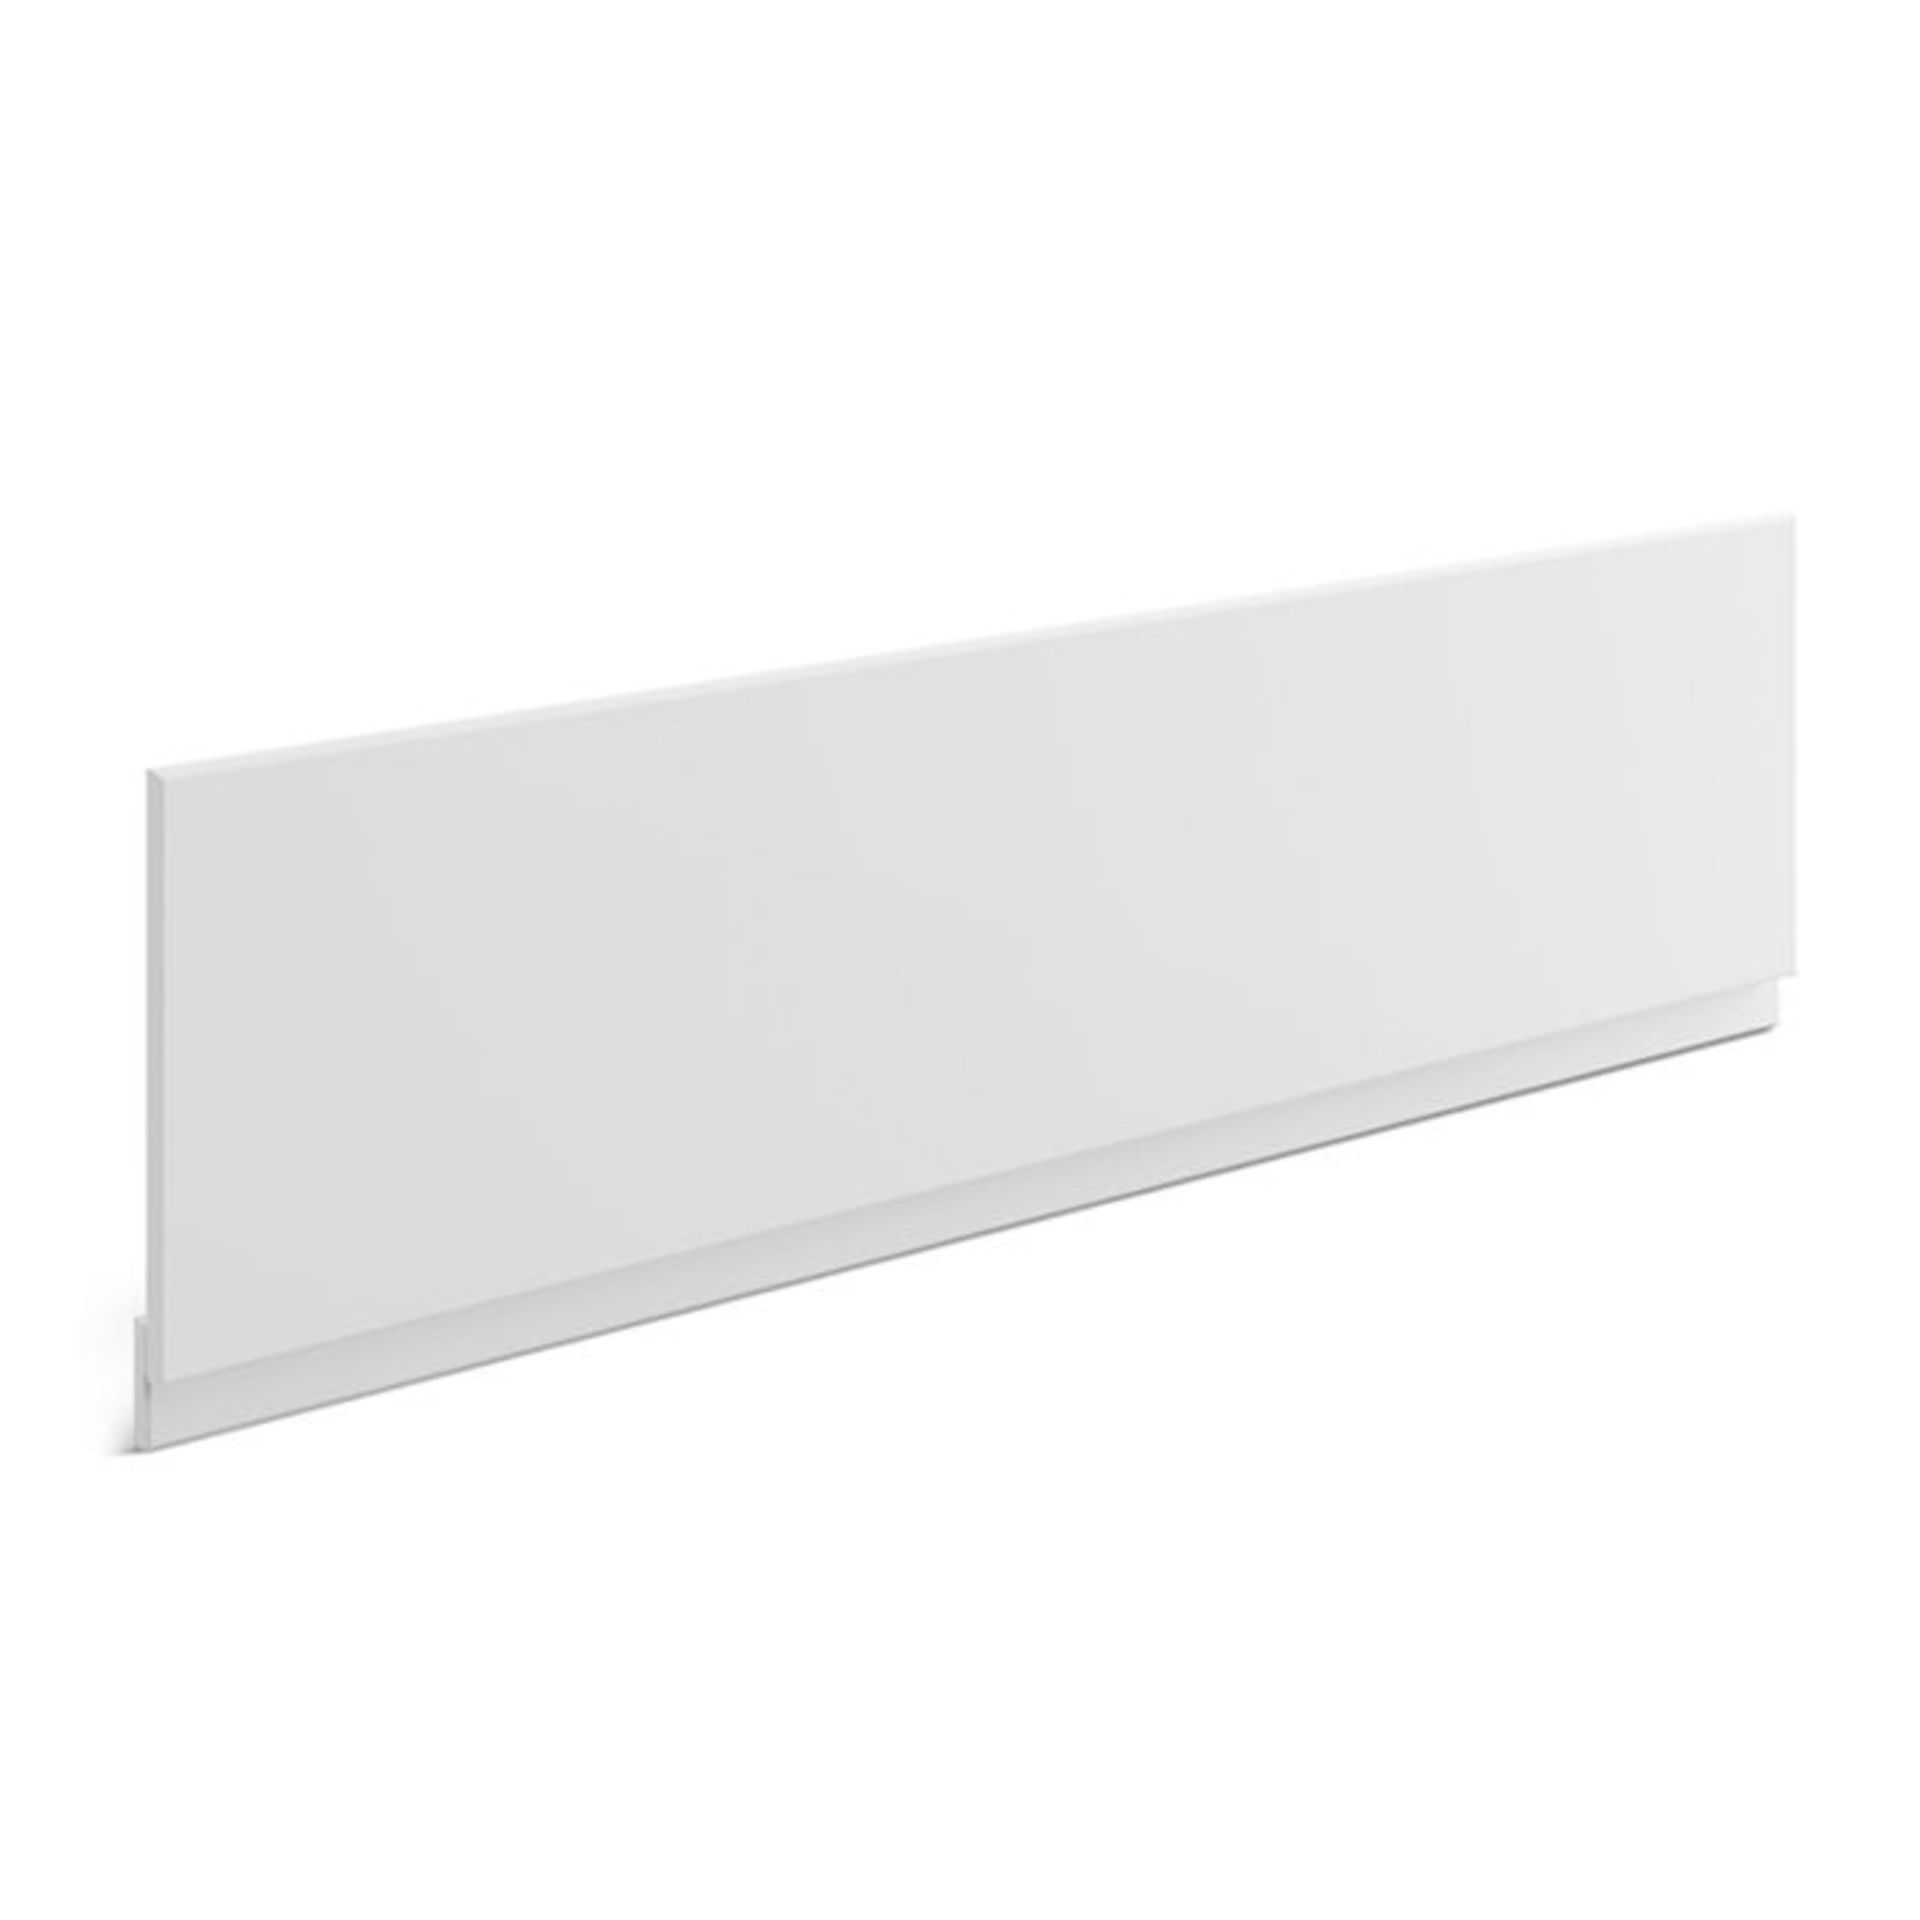 (DW56) 1800mm White MDF Straight Bath Front Panel. RRP £95.00. Specially selected to provide r...